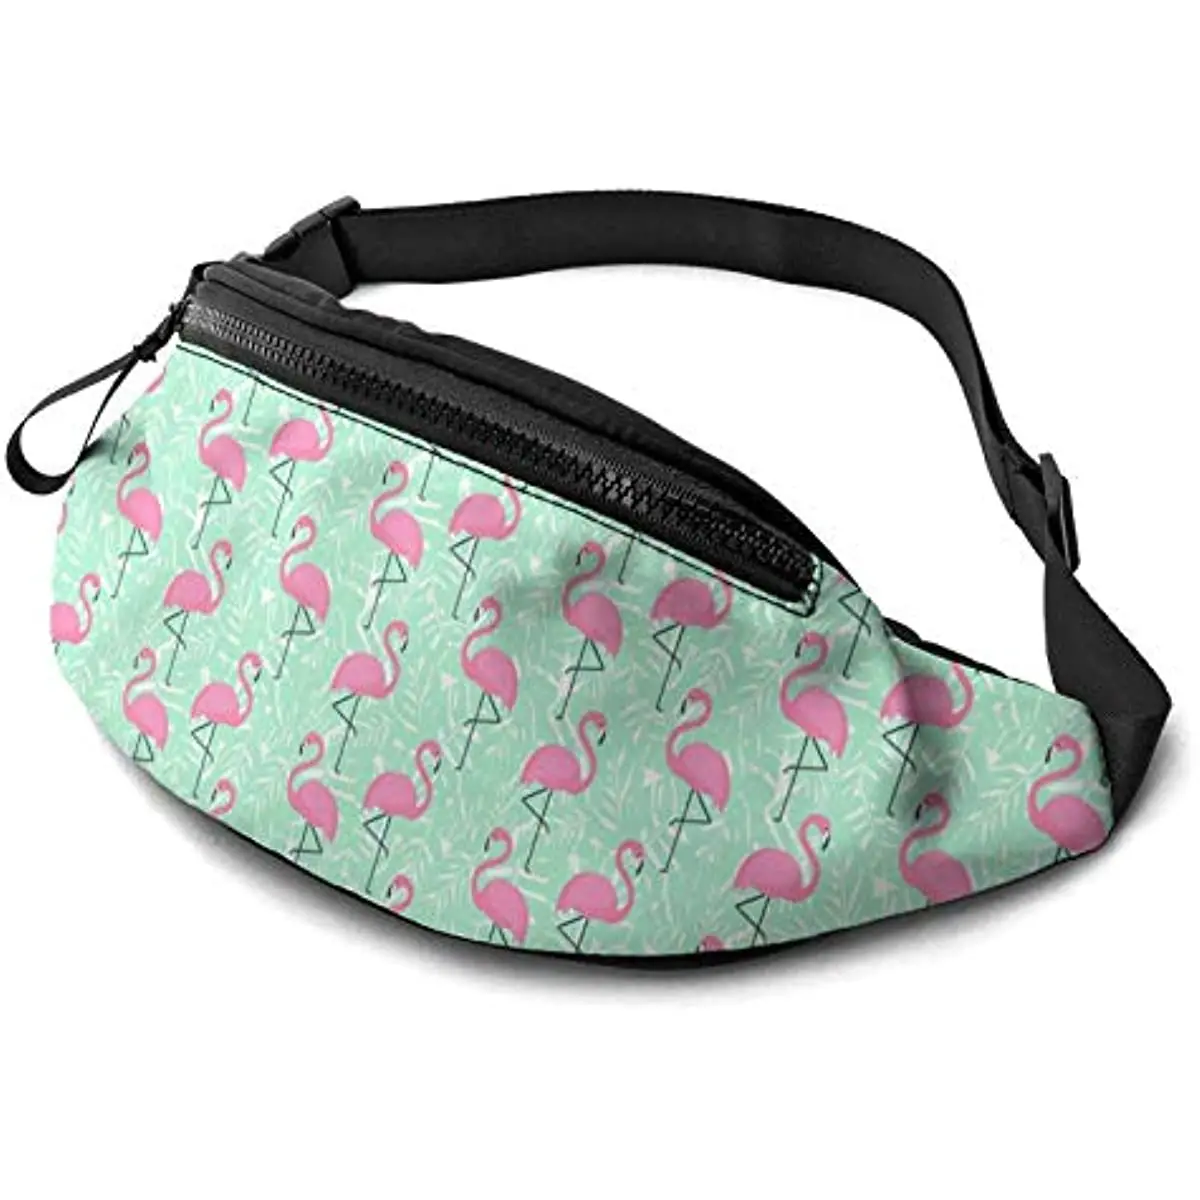 

Flamingo Fanny Pack Waist Bag with Adjustable Strap and Headphone Jack Hip Bum Bag for Man Women Outdoors Sports Hiking Running